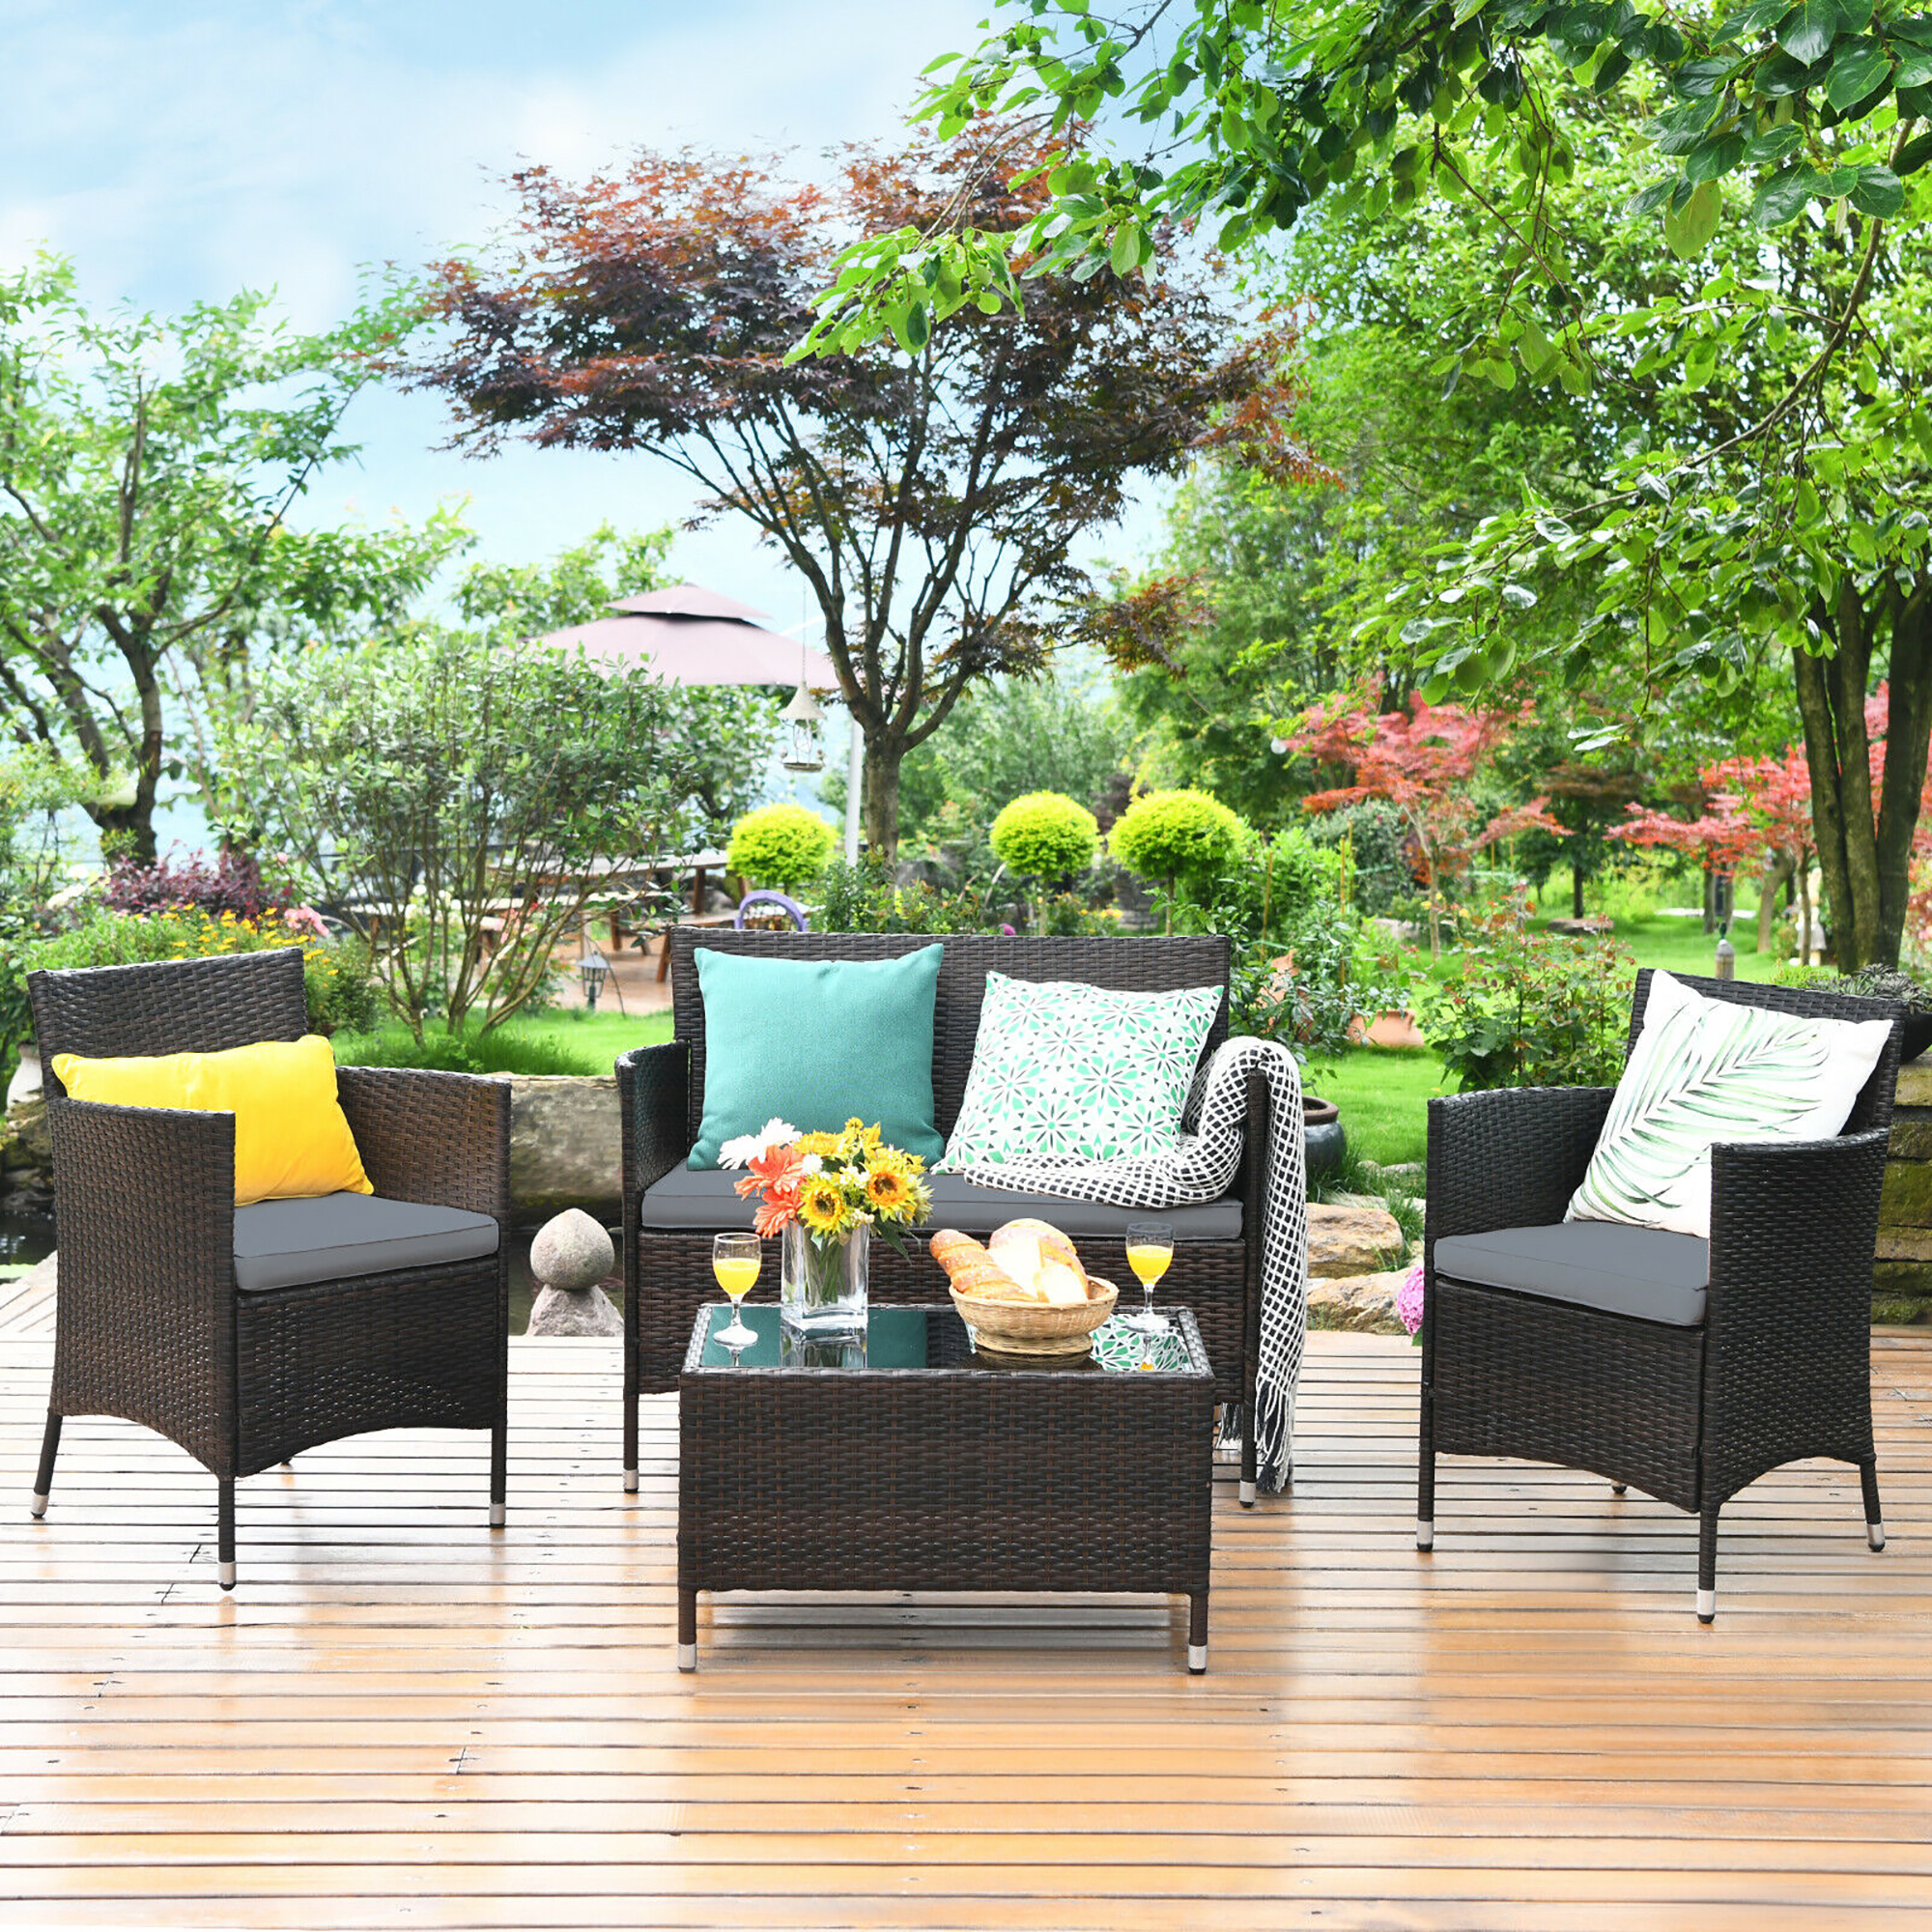 Costway 8PCS Rattan Patio Furniture Set Cushioned Sofa Chair Coffee Table Garden Grey - image 5 of 10